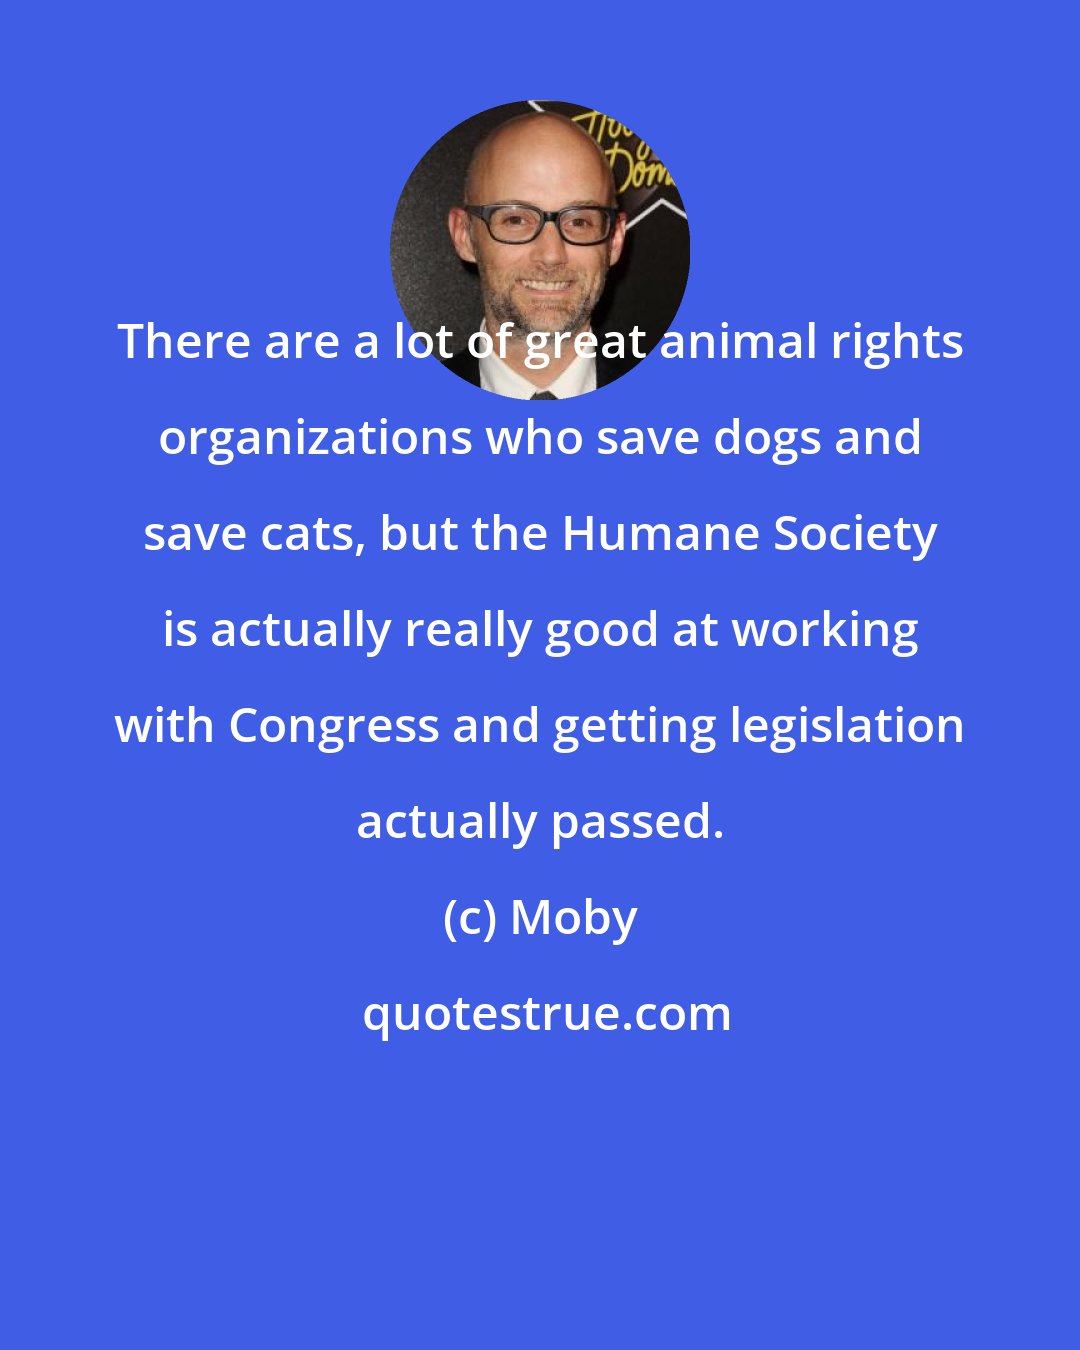 Moby: There are a lot of great animal rights organizations who save dogs and save cats, but the Humane Society is actually really good at working with Congress and getting legislation actually passed.